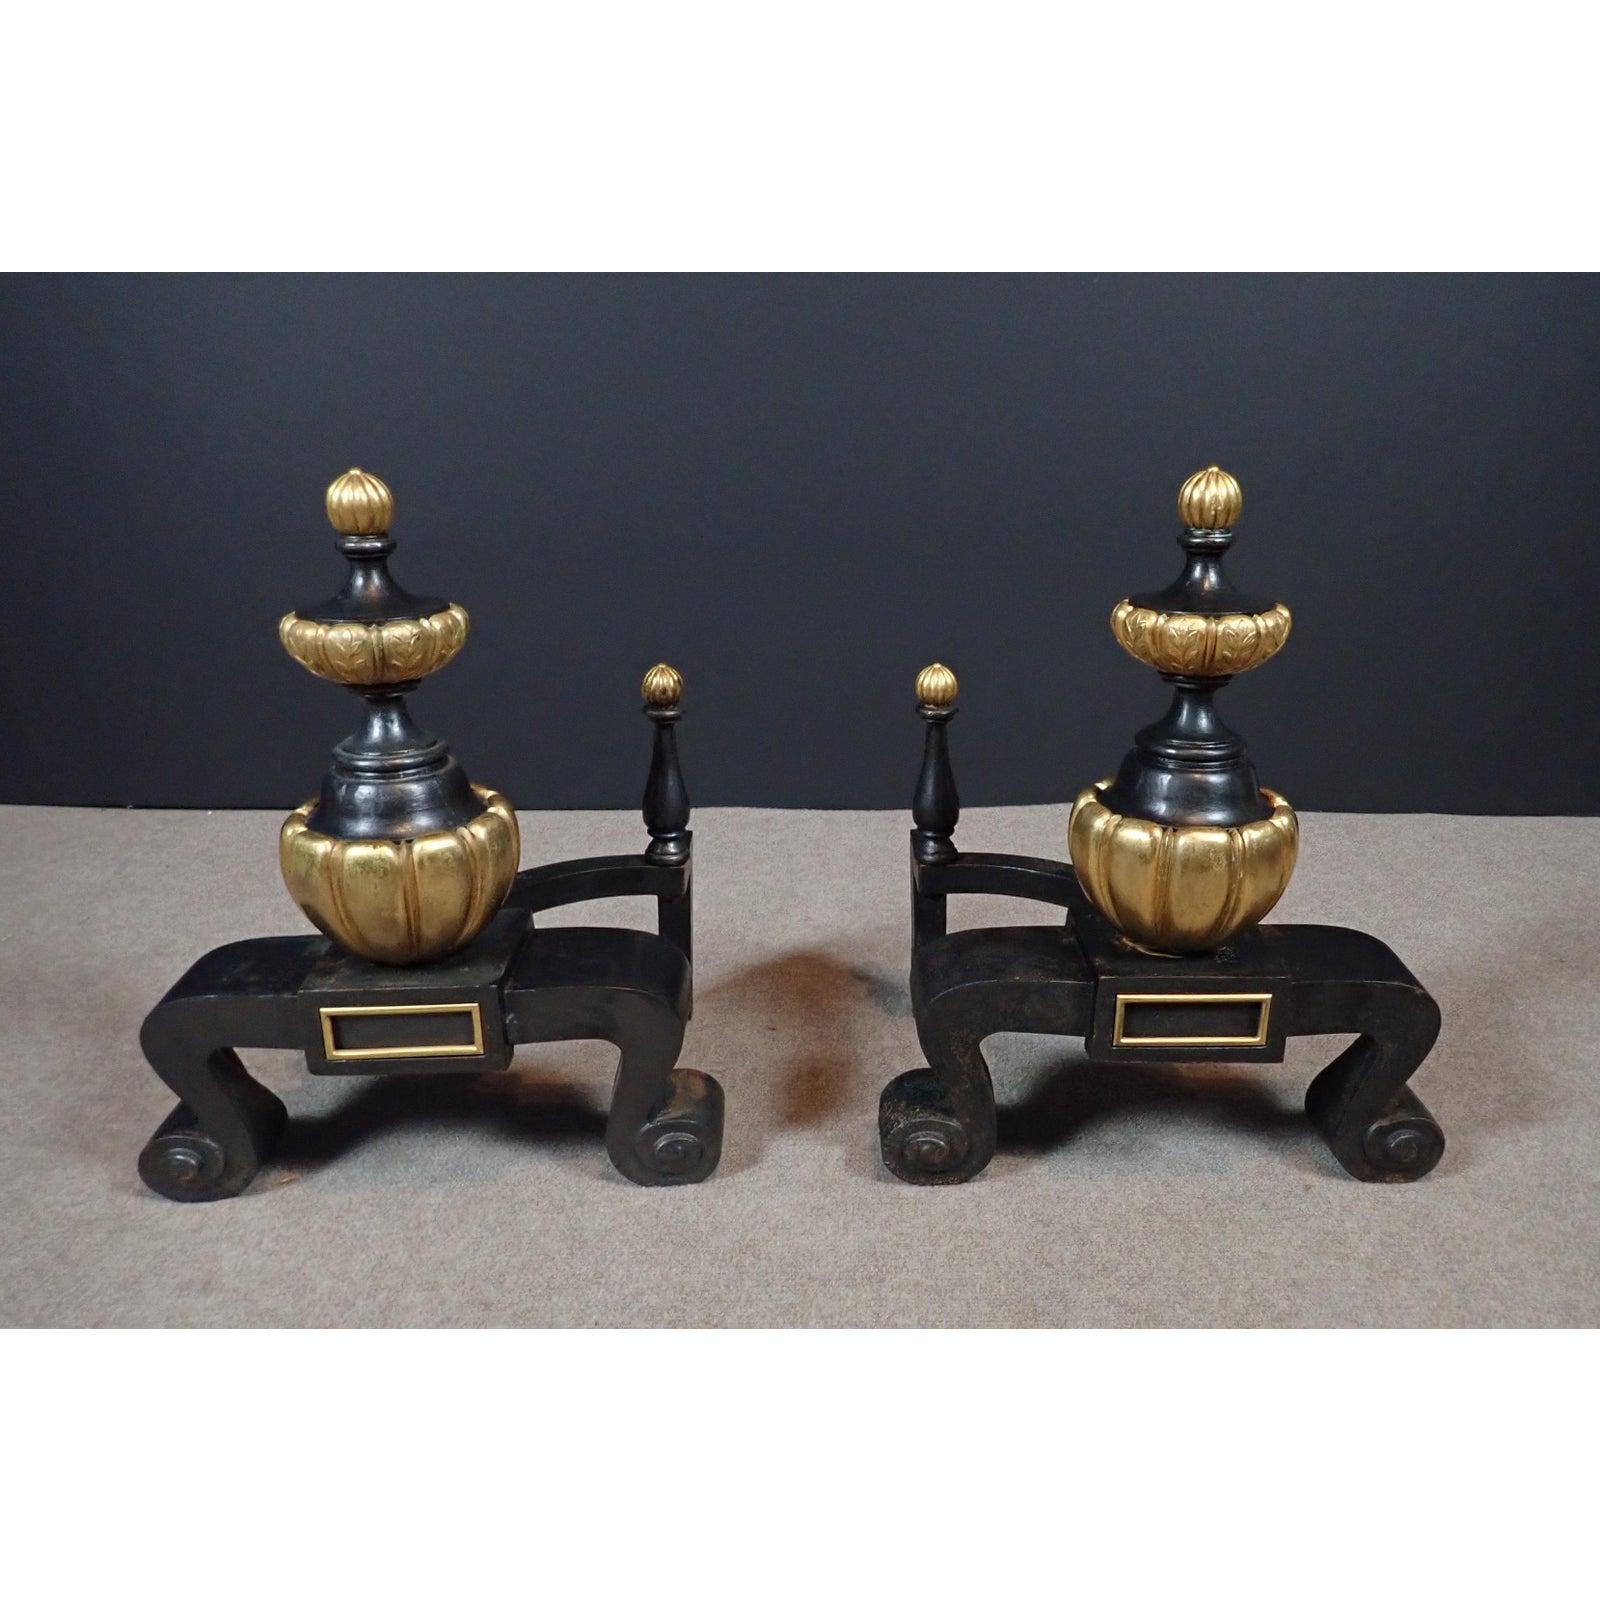 Unusual pair of chenets, Regency style doré bronze and iron. Pair of fine quality, unusual chenets/andirons. Of bulbus form in the manor of a balustrade. Full and heavy in feel.